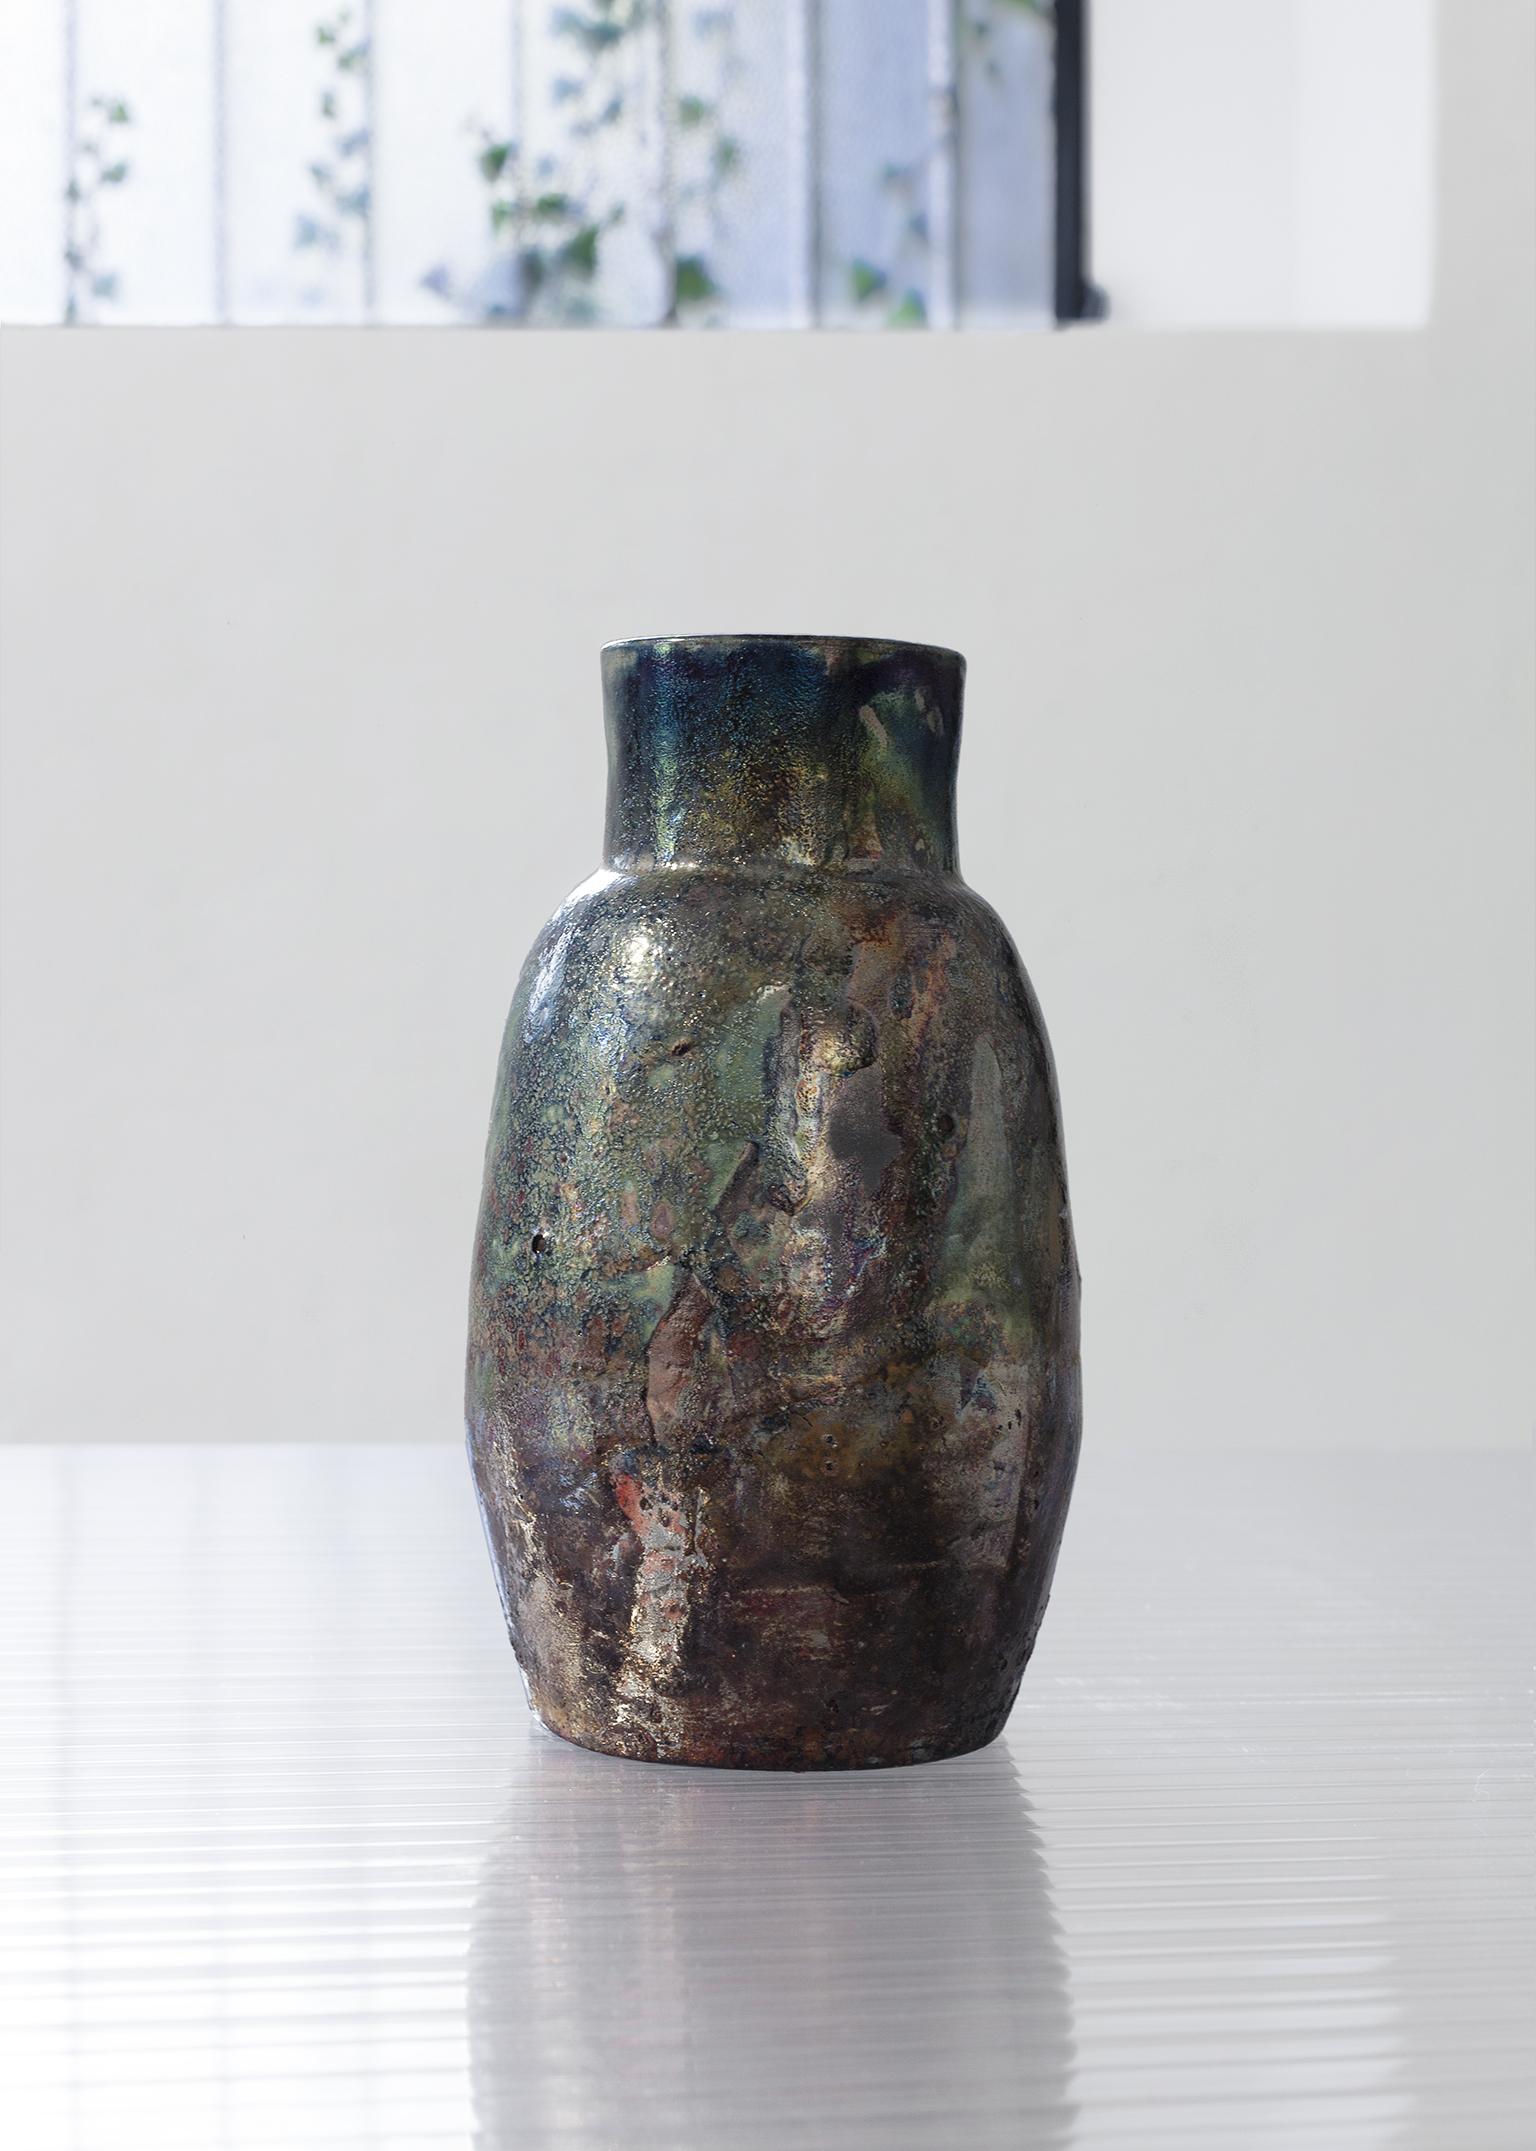 Paolo Spalluto for Camp Design Gallery
Naked Raku - water reduction I, 2015
English clay hand-made with traditional techniques of naked raku

Measures: Ø 11 x H 26
Unique piece with signed certification.

Camp Commission,